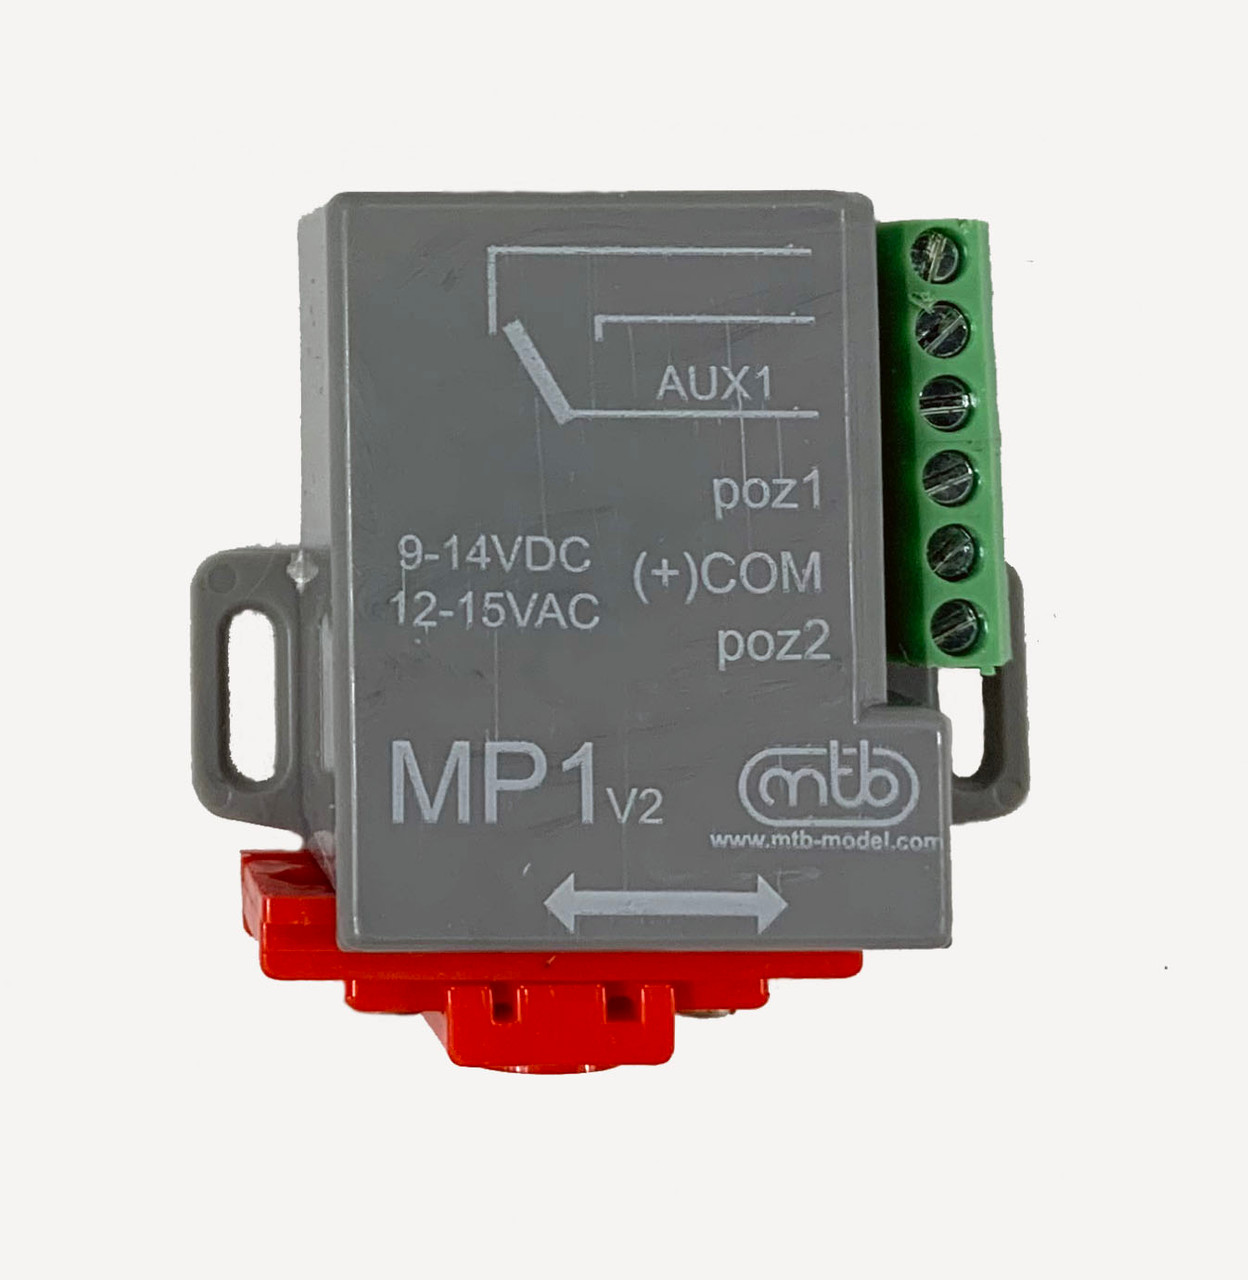 MP1 compact switch motor